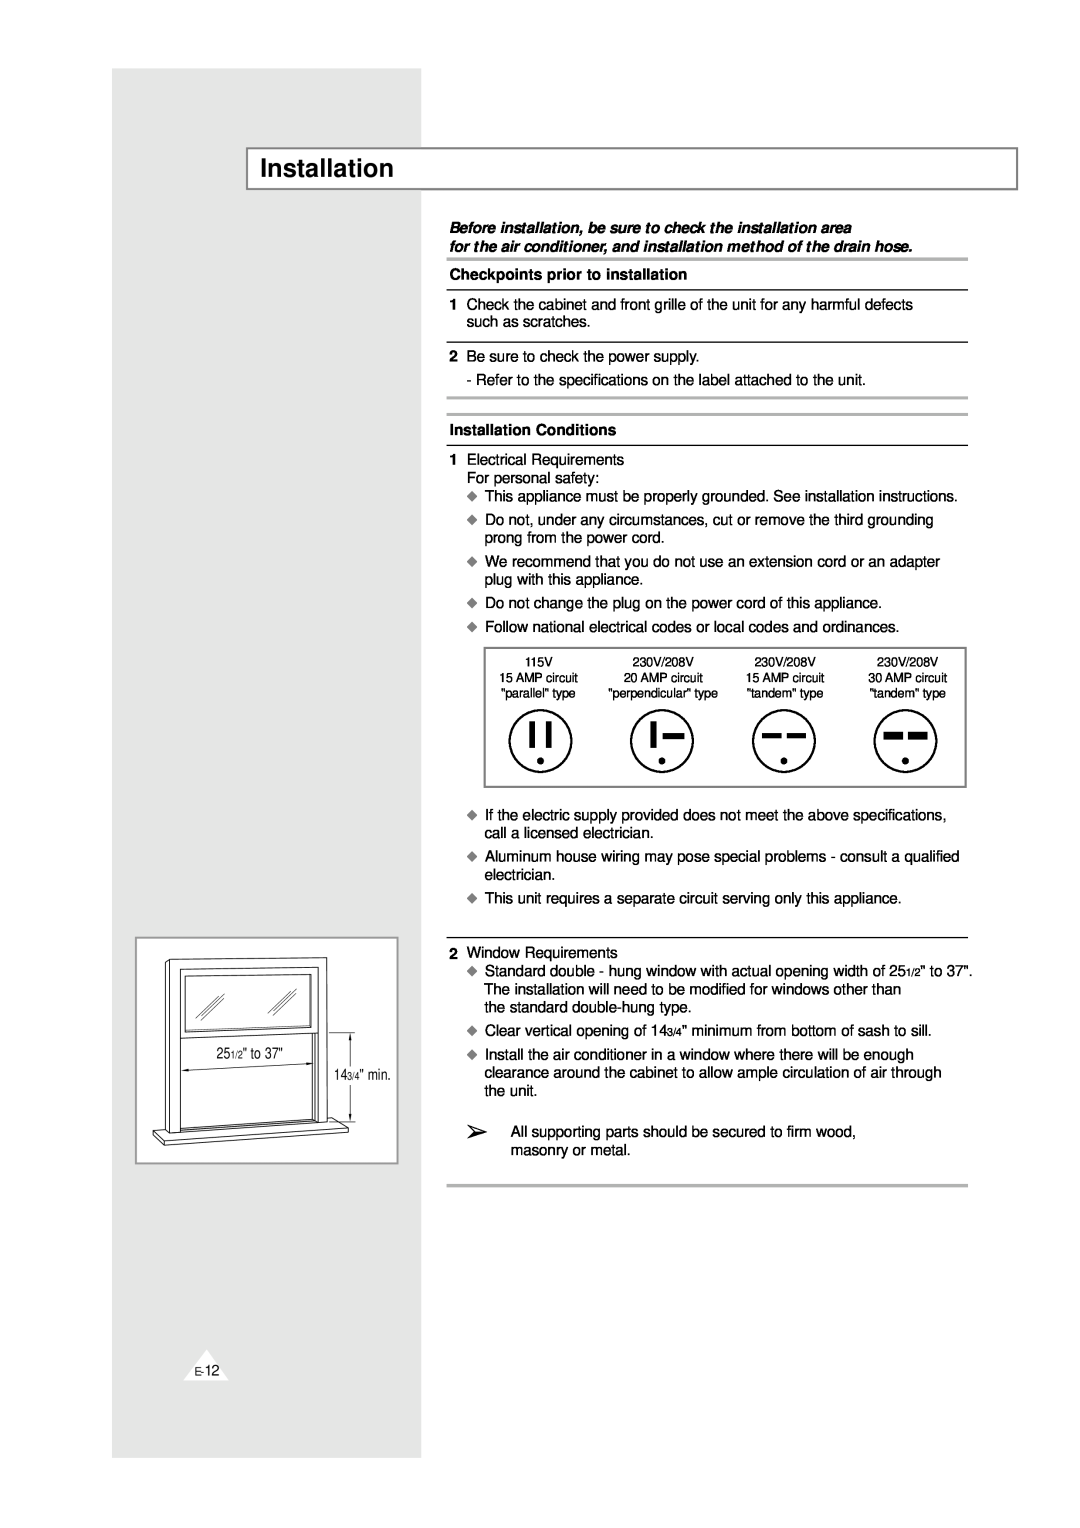 Samsung AW0719, AW0819 manual Checkpoints prior to installation, Installation Conditions 